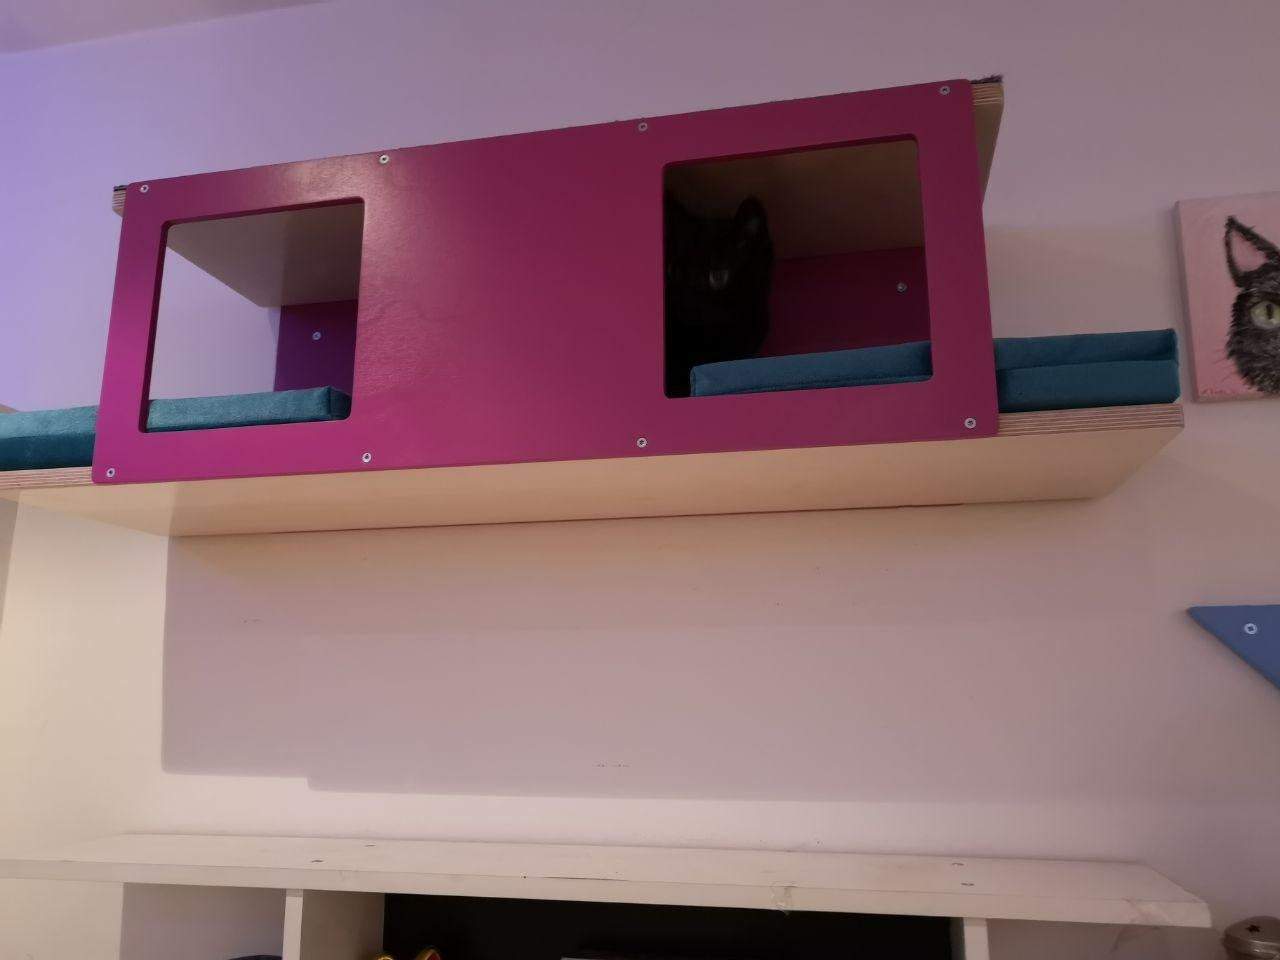 Cat Wall Shelf Bed - Wally Tunnel Upside-Down - Scratchy Things Premium Pet Furniture